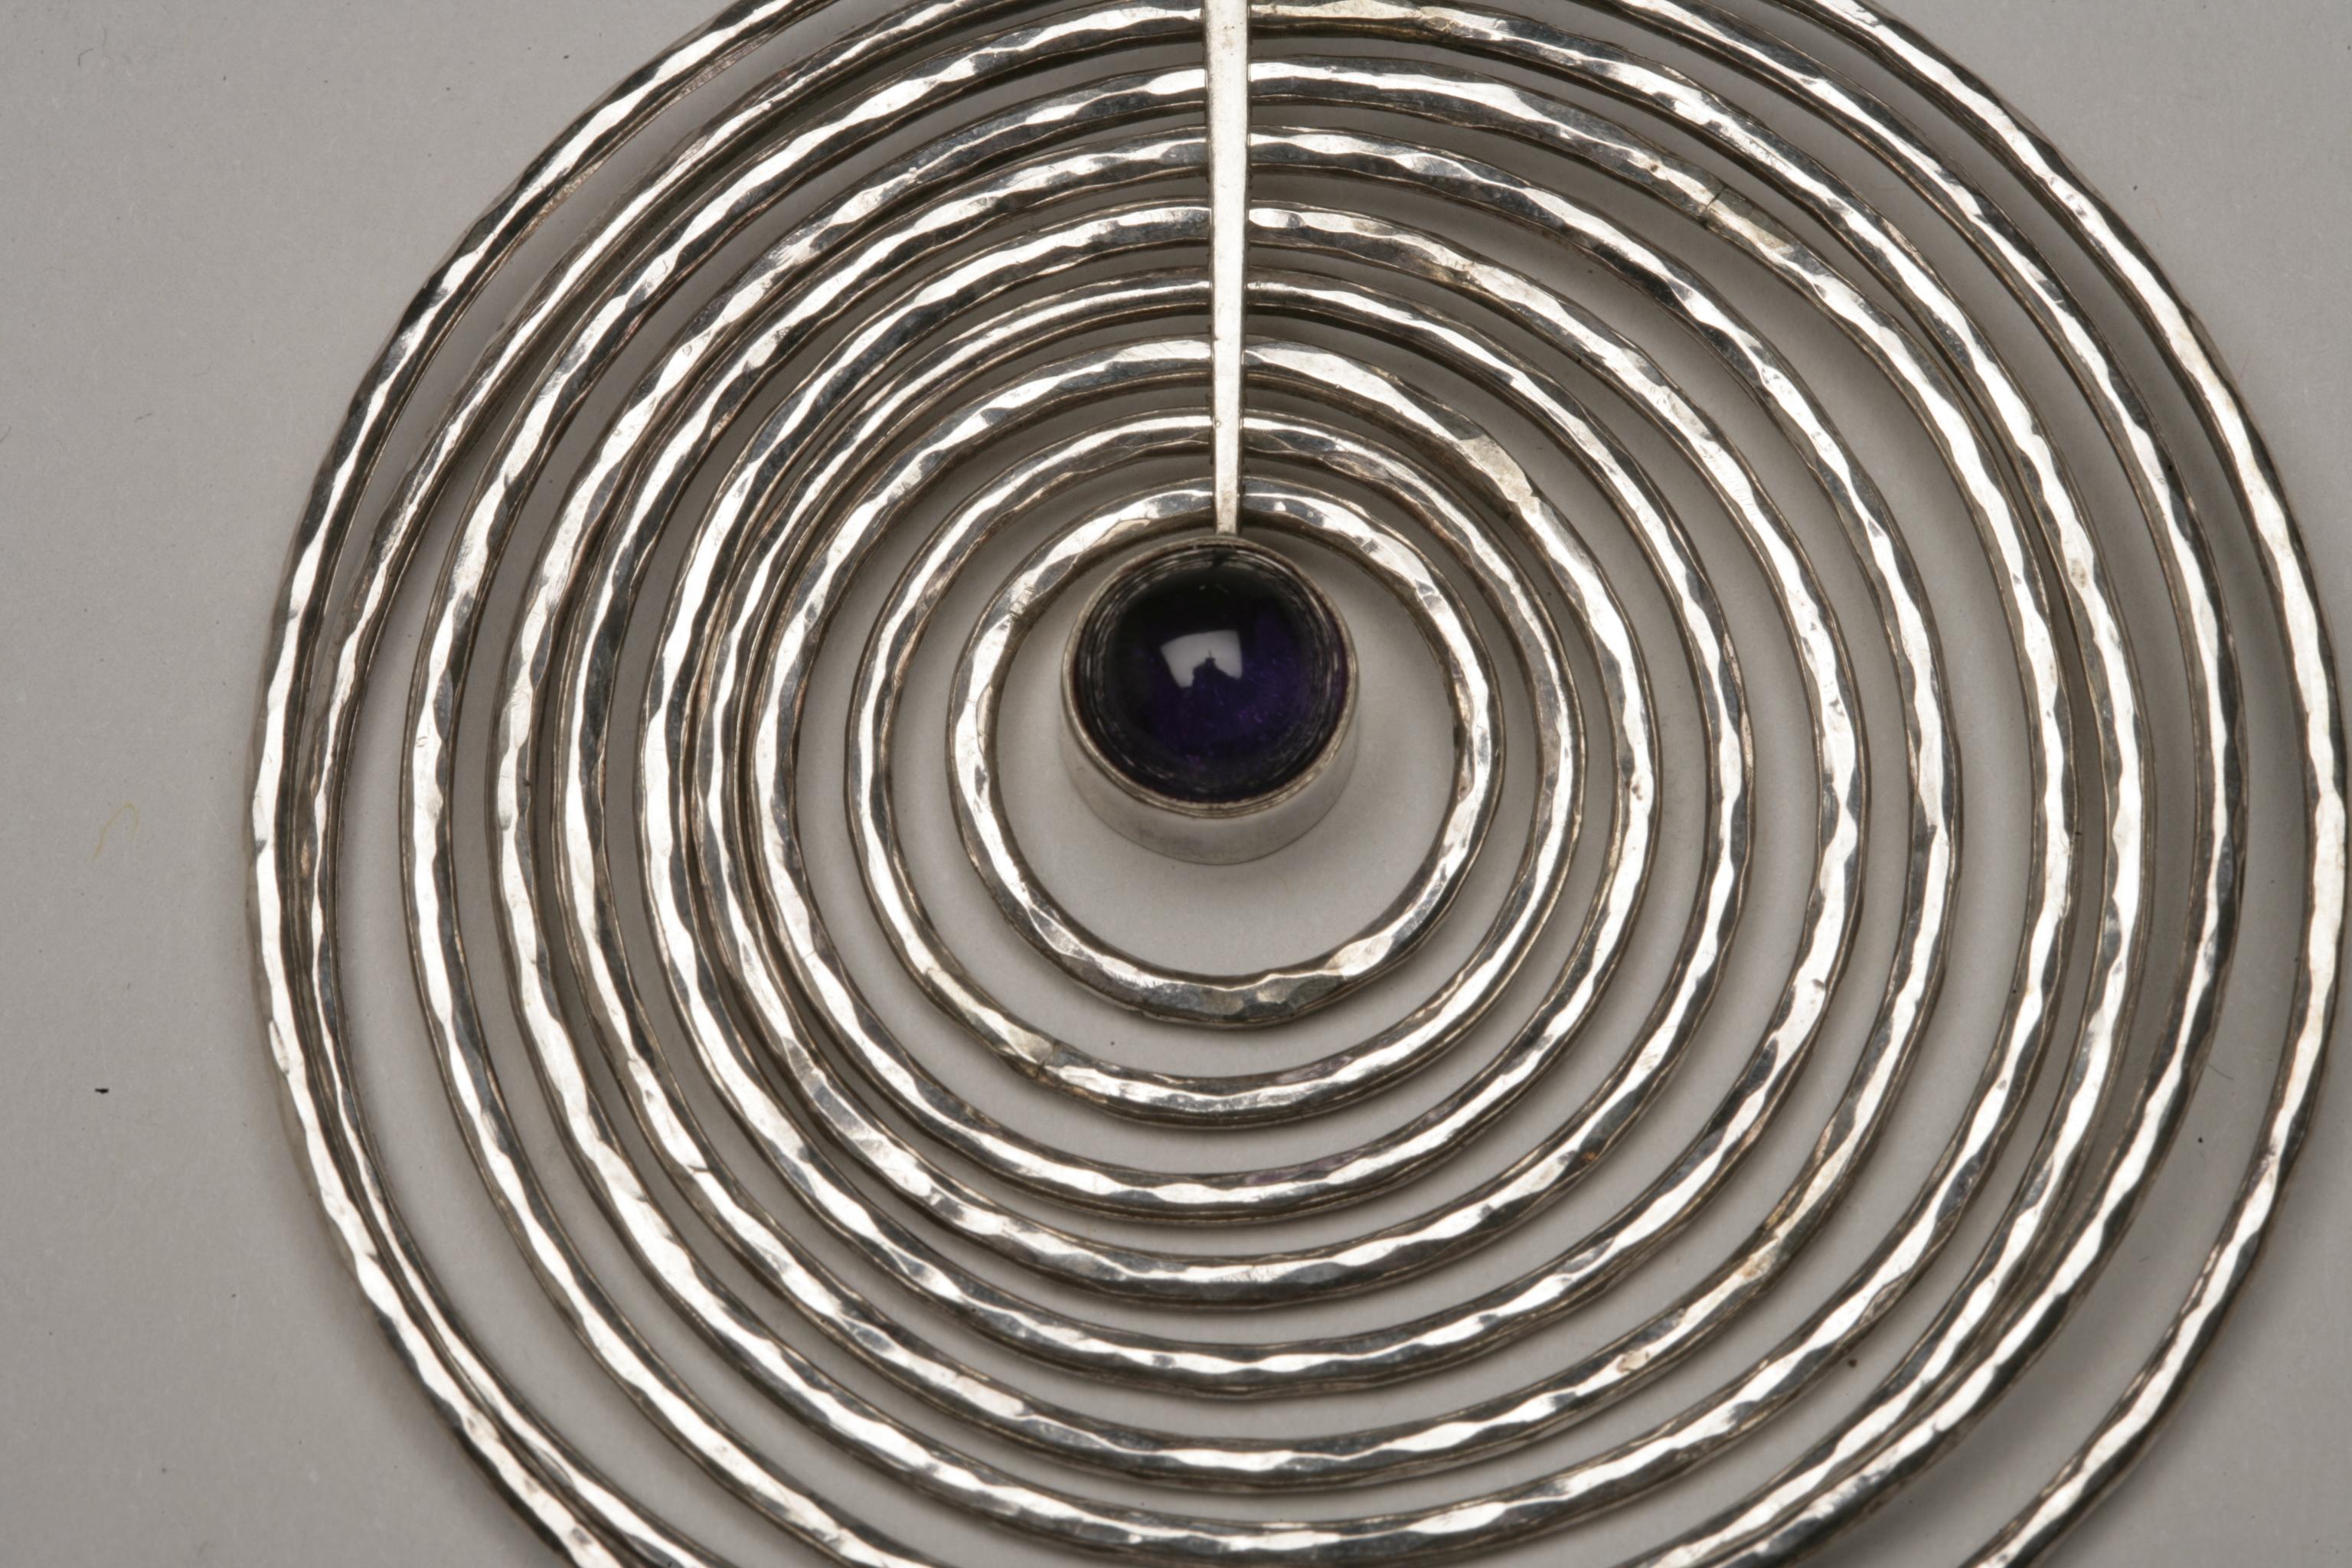 Georg Jensen Sterling Silver and Amethyst Pendant Designed By Bent Gabrielsen, design number 145

Designer: Bent Gabrielsen
Maker: Georg Jensen
Design #: 145
Circa: post 45 (1945-77)
Dimensions: 4.125” X 2.75” X 0.375”
Country of Origin: Denmark